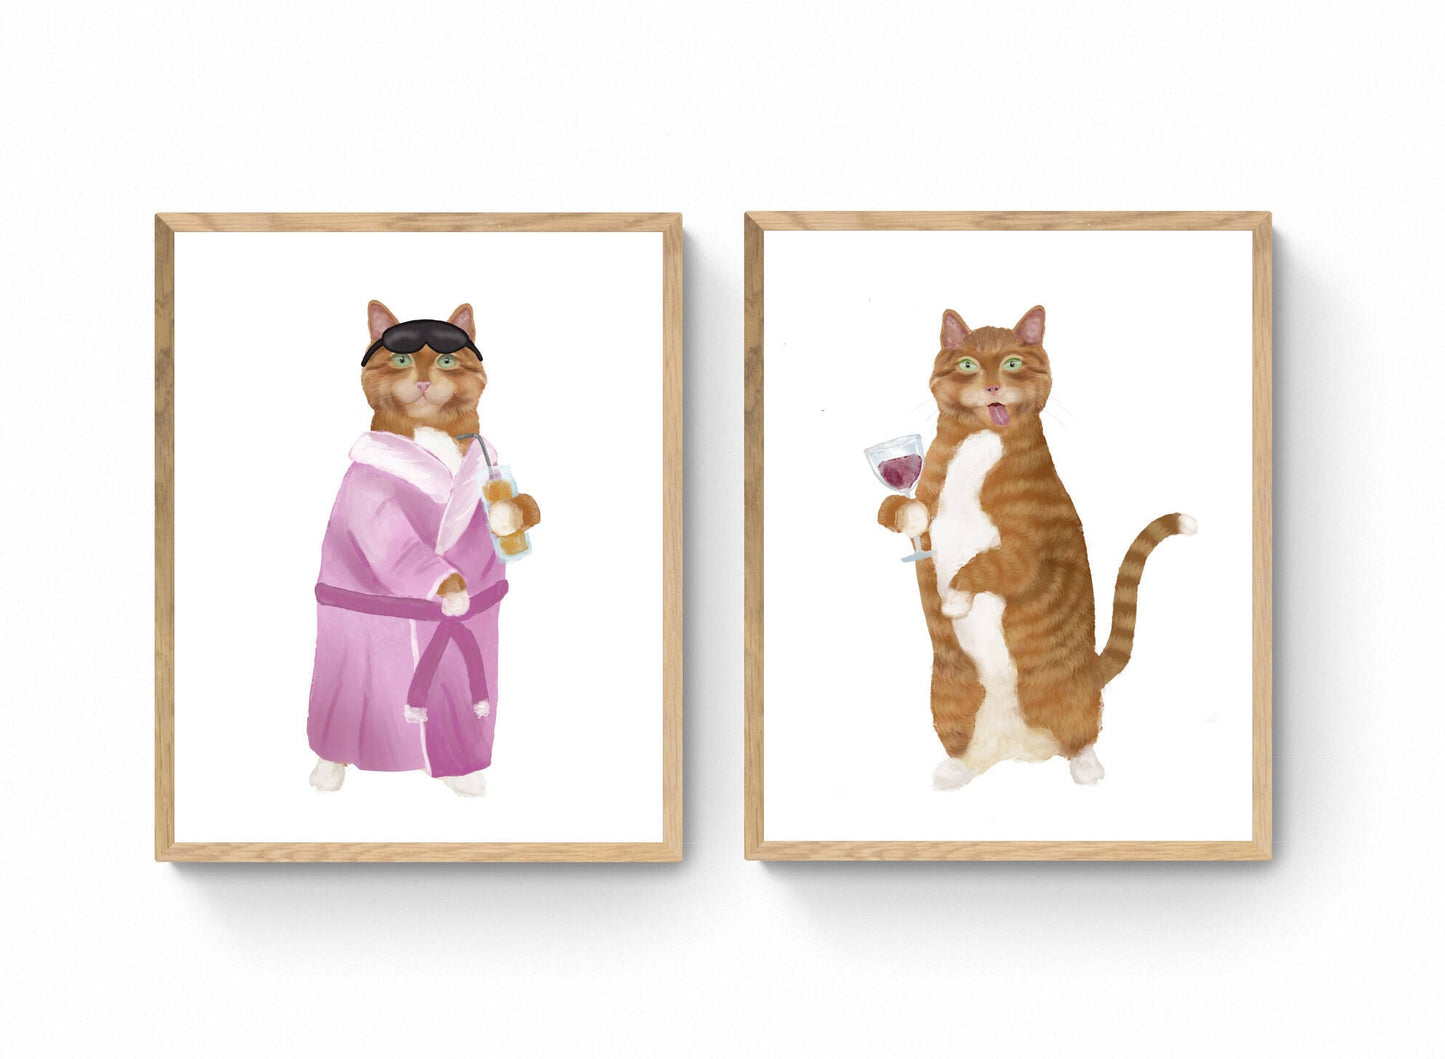 Set of 2 Orange Tabby with Wine Art Prints, Hangover Cat Print, Cat Drinking Wine Art, Drunk Cat Illustration, Home Decor, Hungover Painting